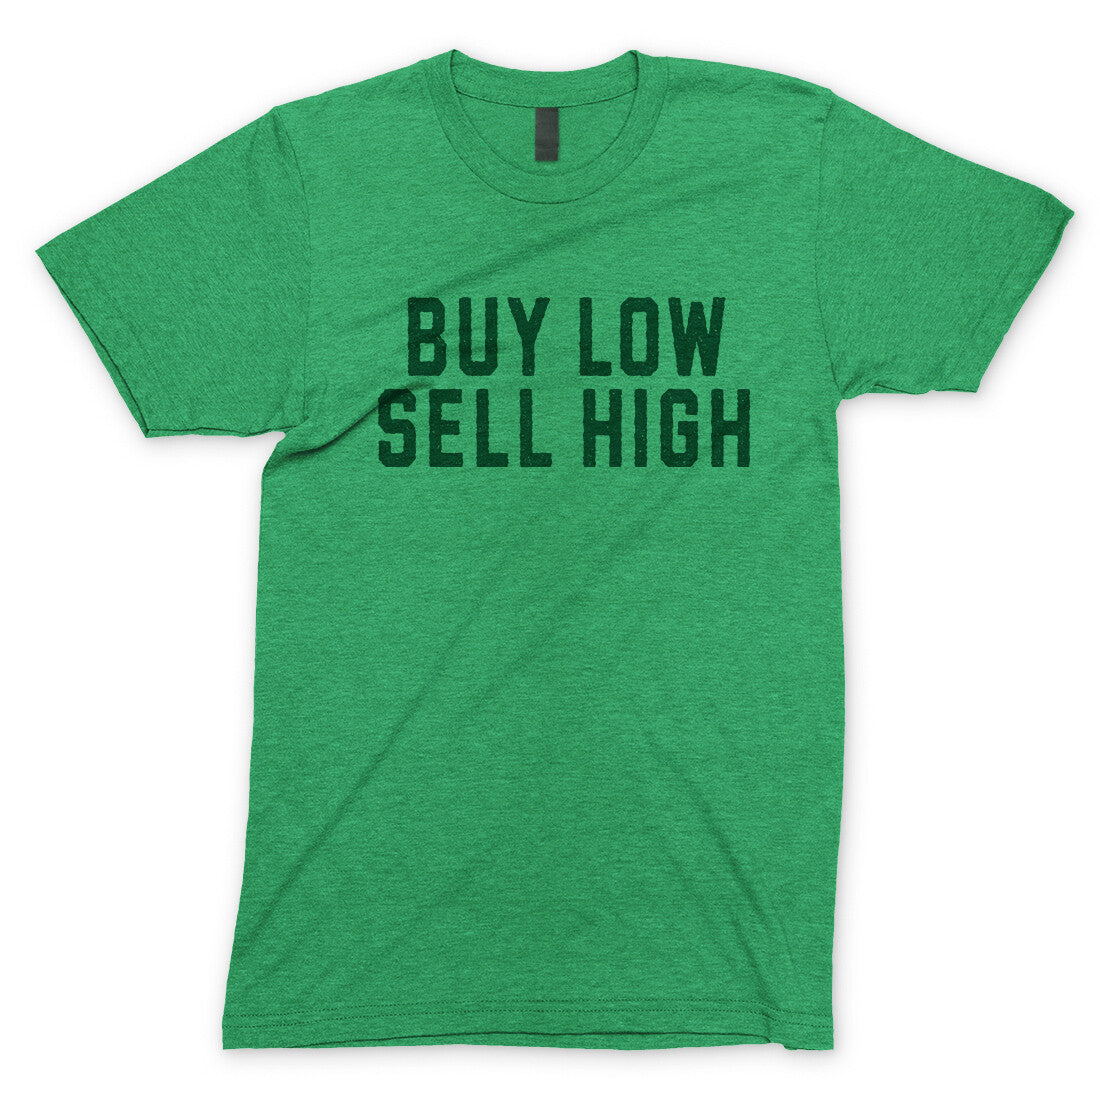 Buy Low Sell High in Heather Irish Green Color